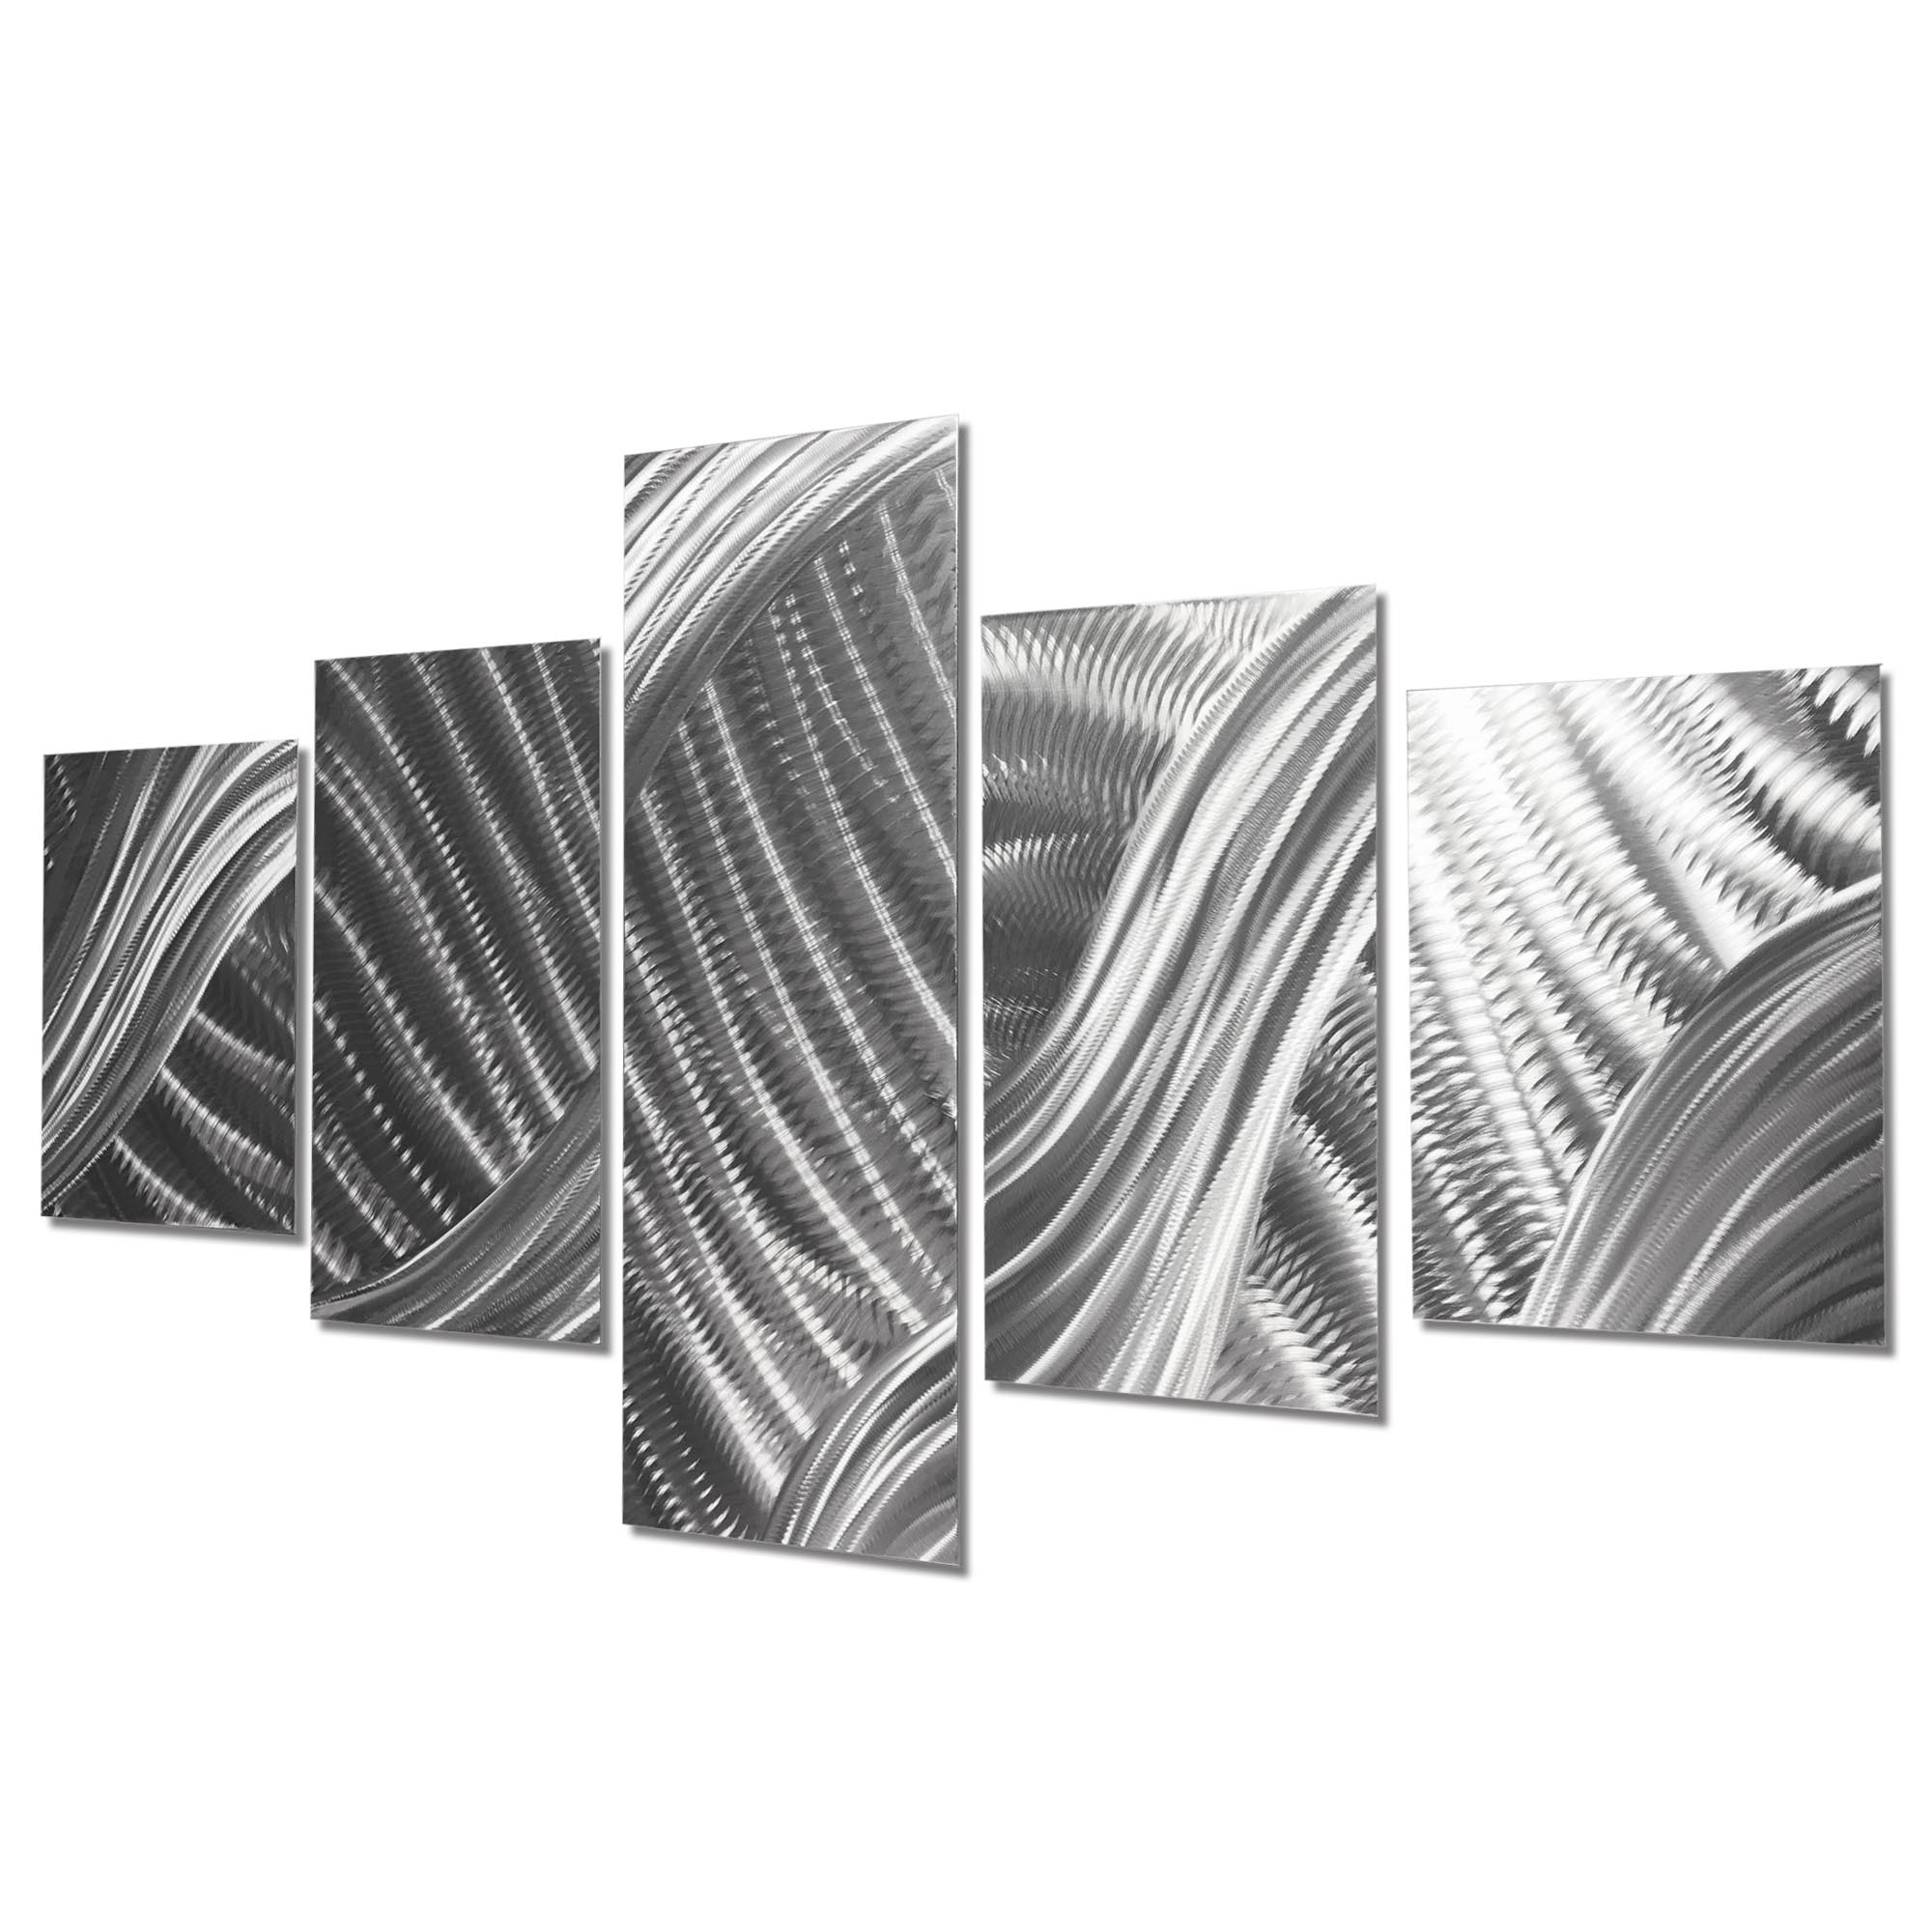 Columnar Brushstrokes 64x36in. Natural Aluminum Abstract Decor - Image 2